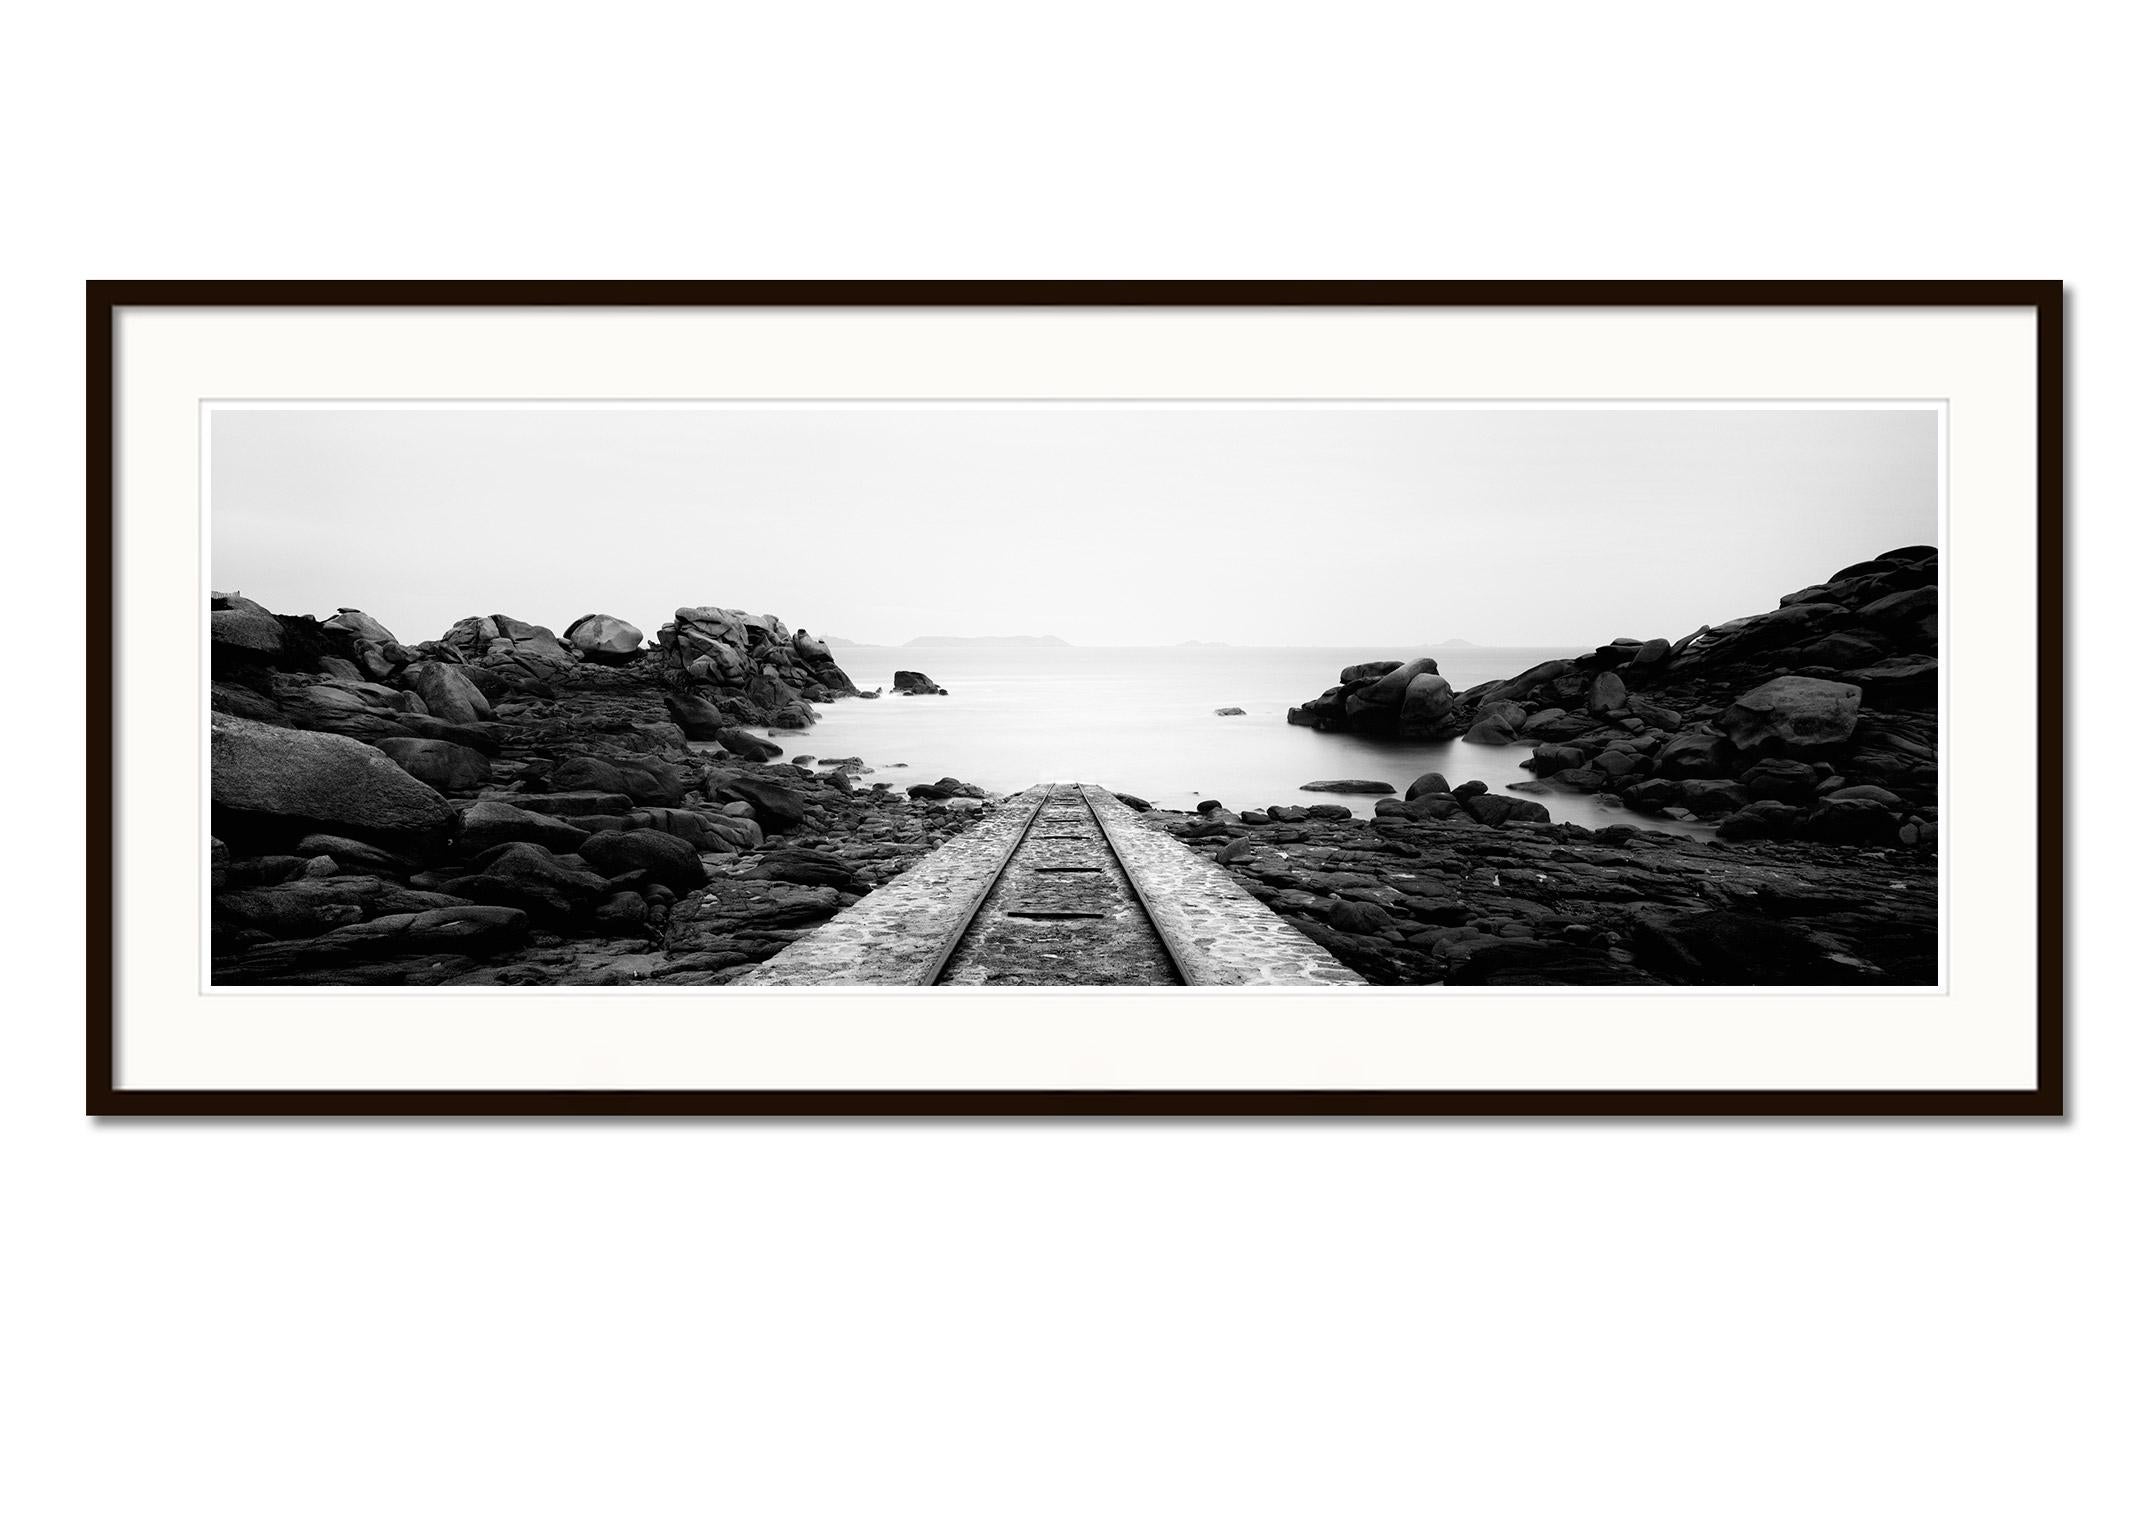 Into the Ocean railroad Atlantic bay France black white landscape photography - Gray Landscape Photograph by Gerald Berghammer